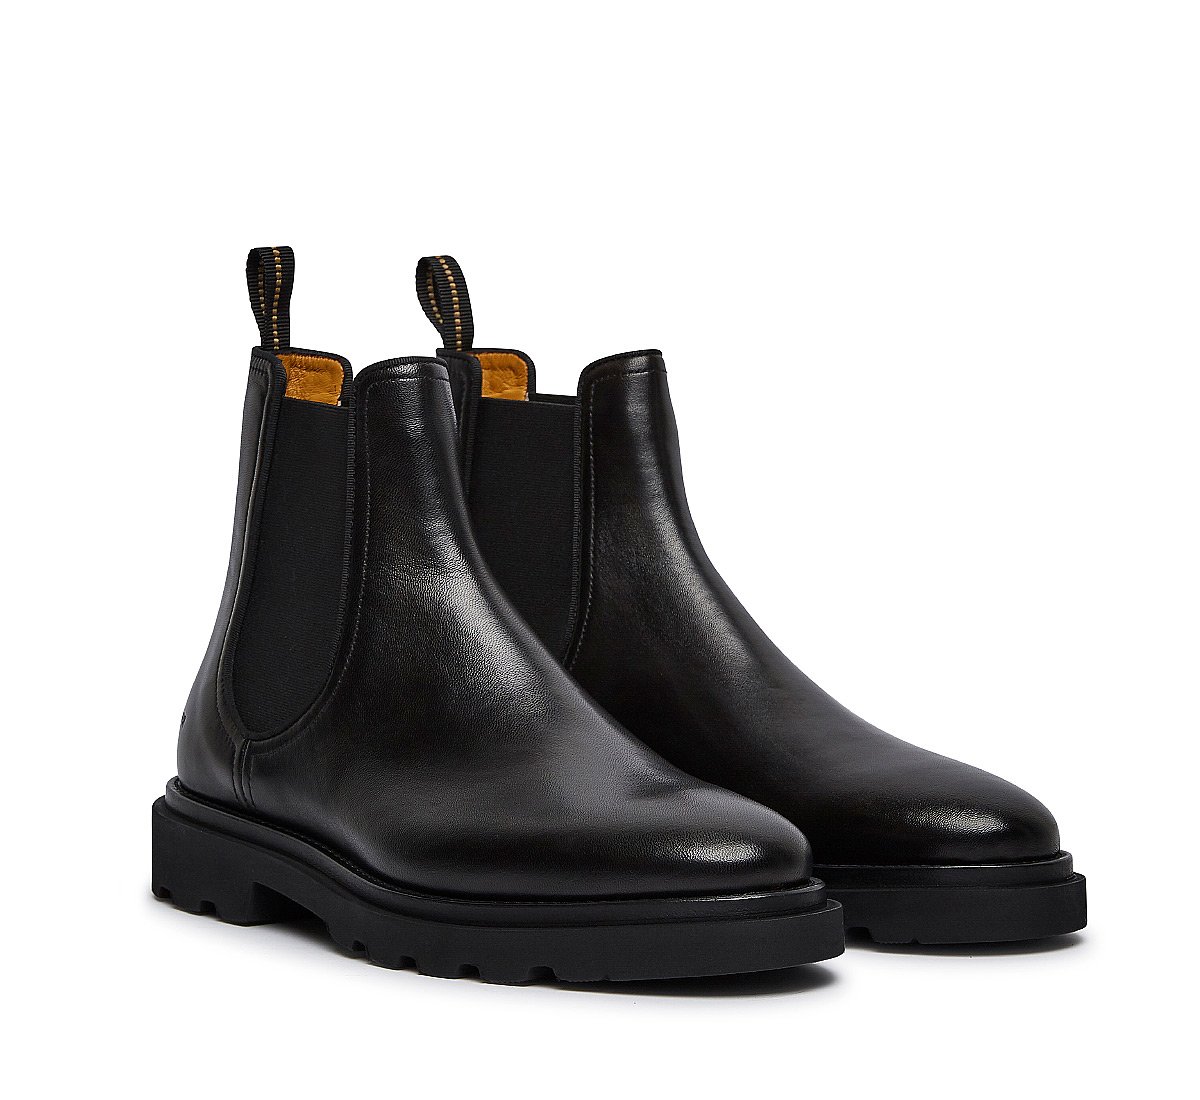 Soft nappa leather Beatle boots